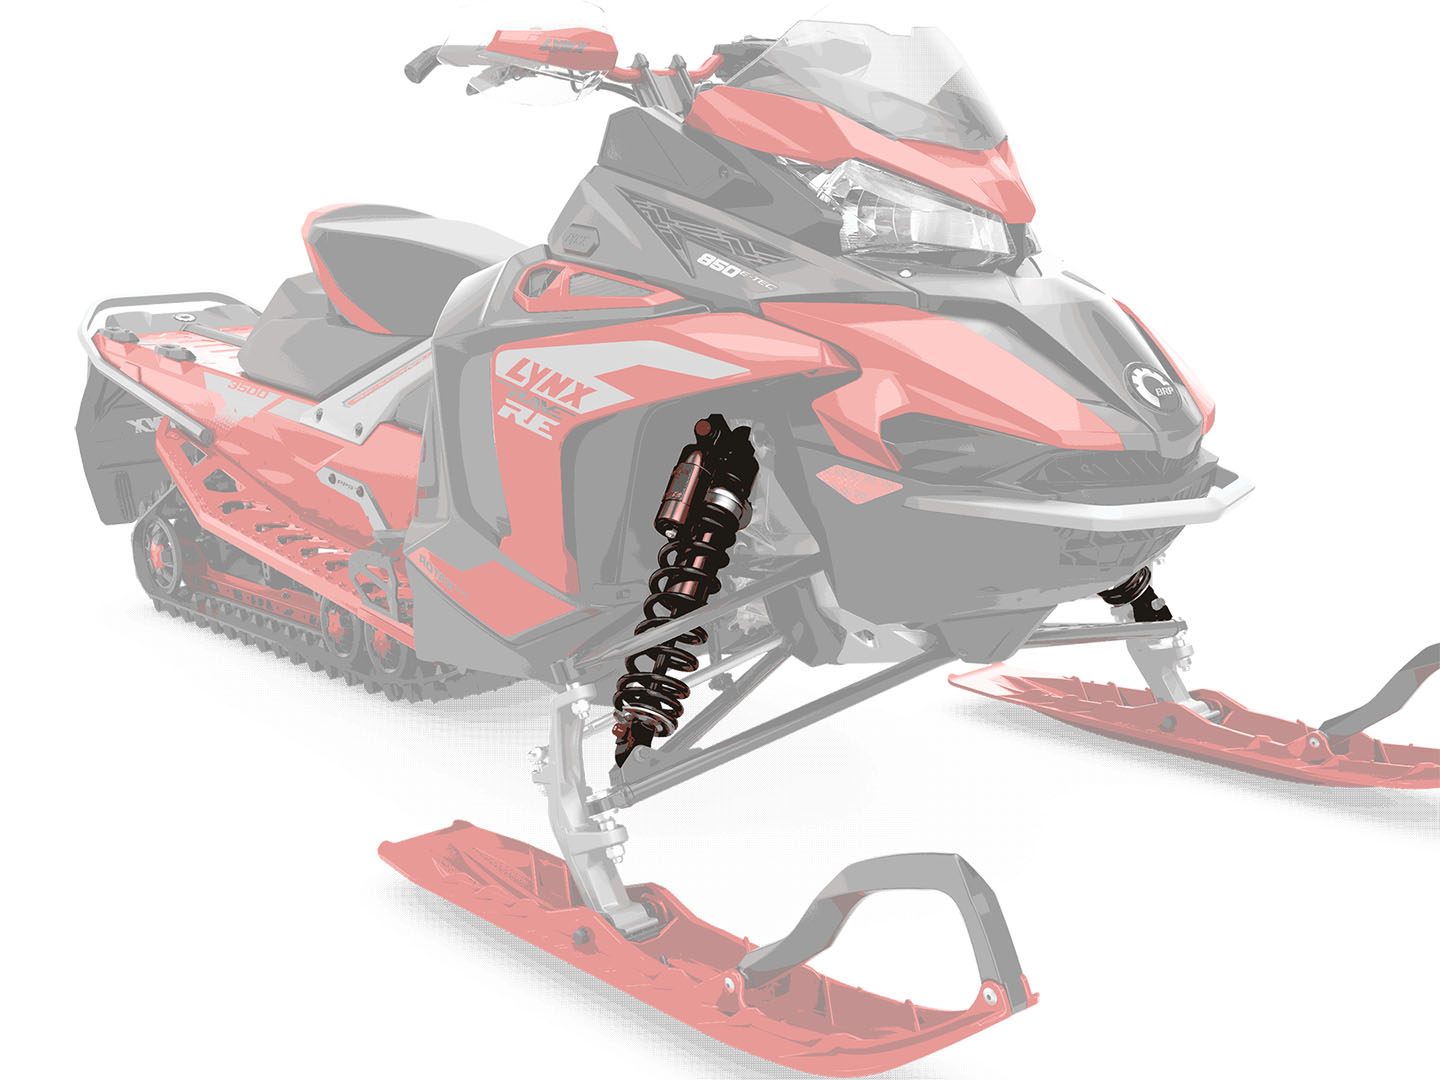 MORE STABILITY: LFS+ front suspension - The new LFS+ front suspension features more suspension travel and wider, 1097 mm ski stance, providing the Lynx Rave sport snowmobile with improved control and flatter cornering capability. - Photo 11